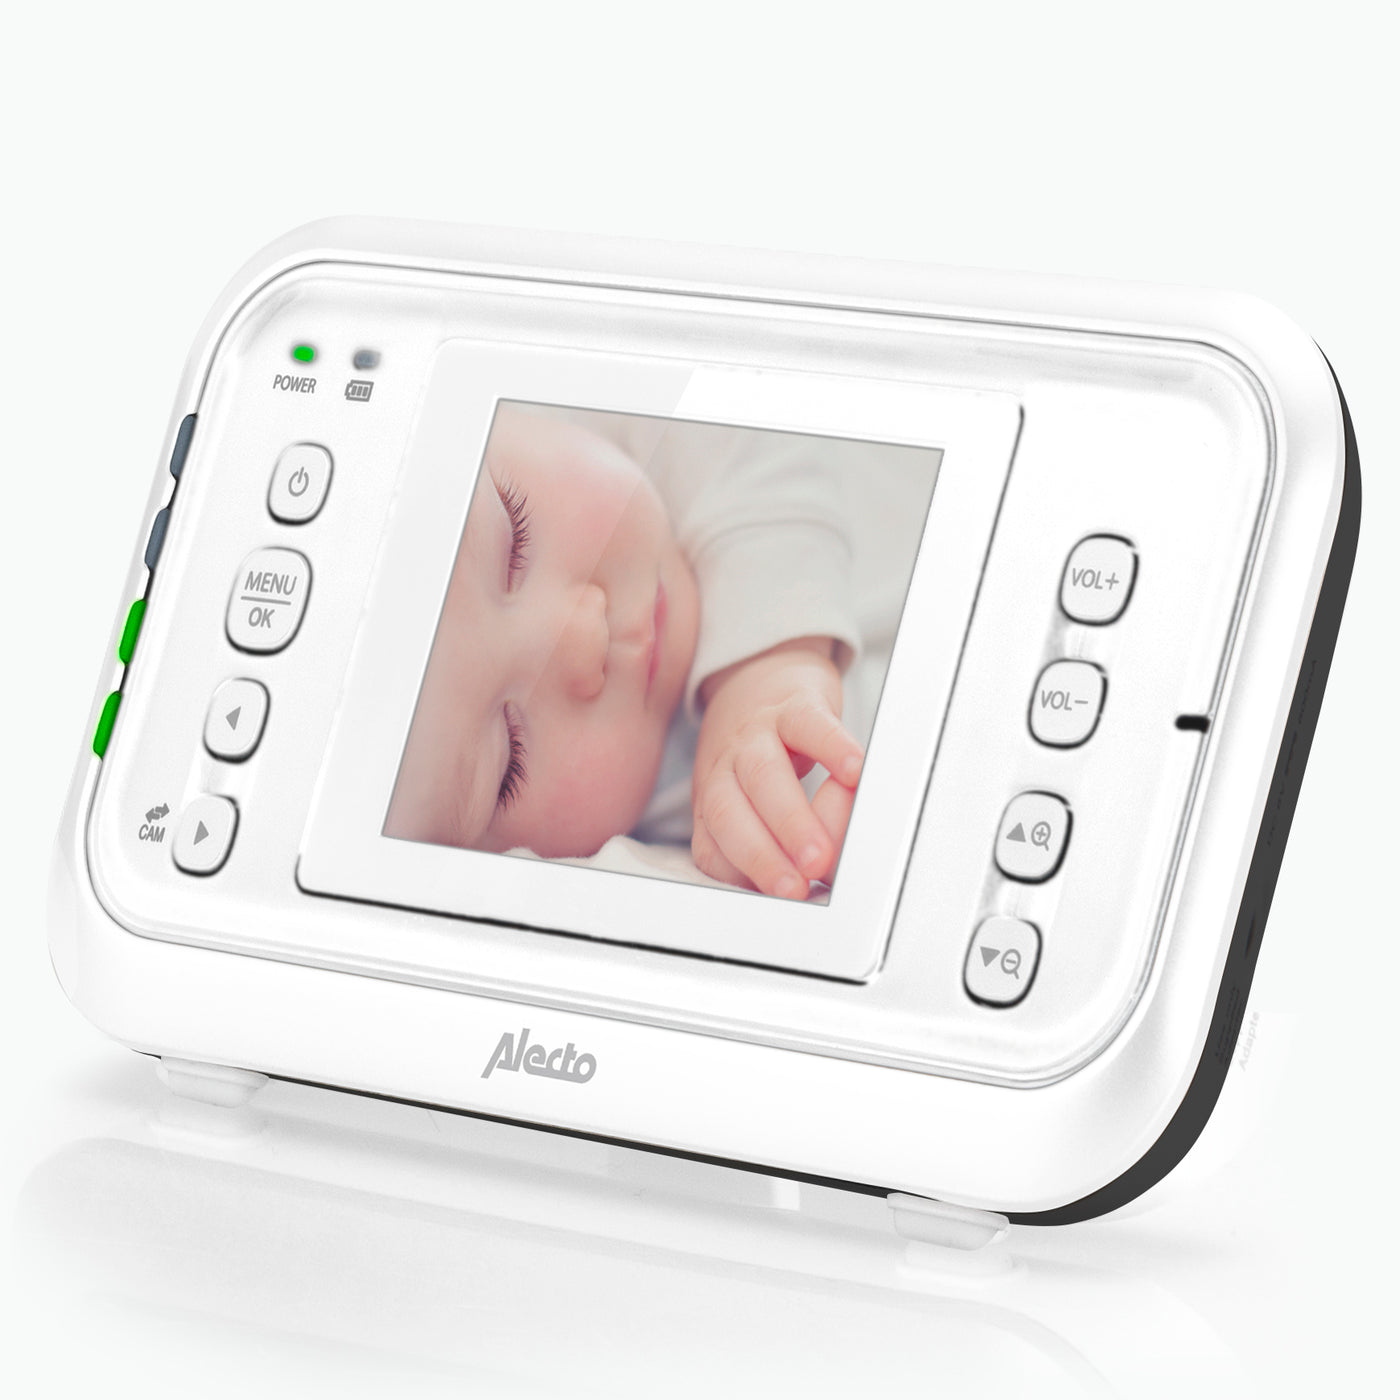 Alecto DVM-73 - Video baby monitor with 2.4" colour display, white/anthracite